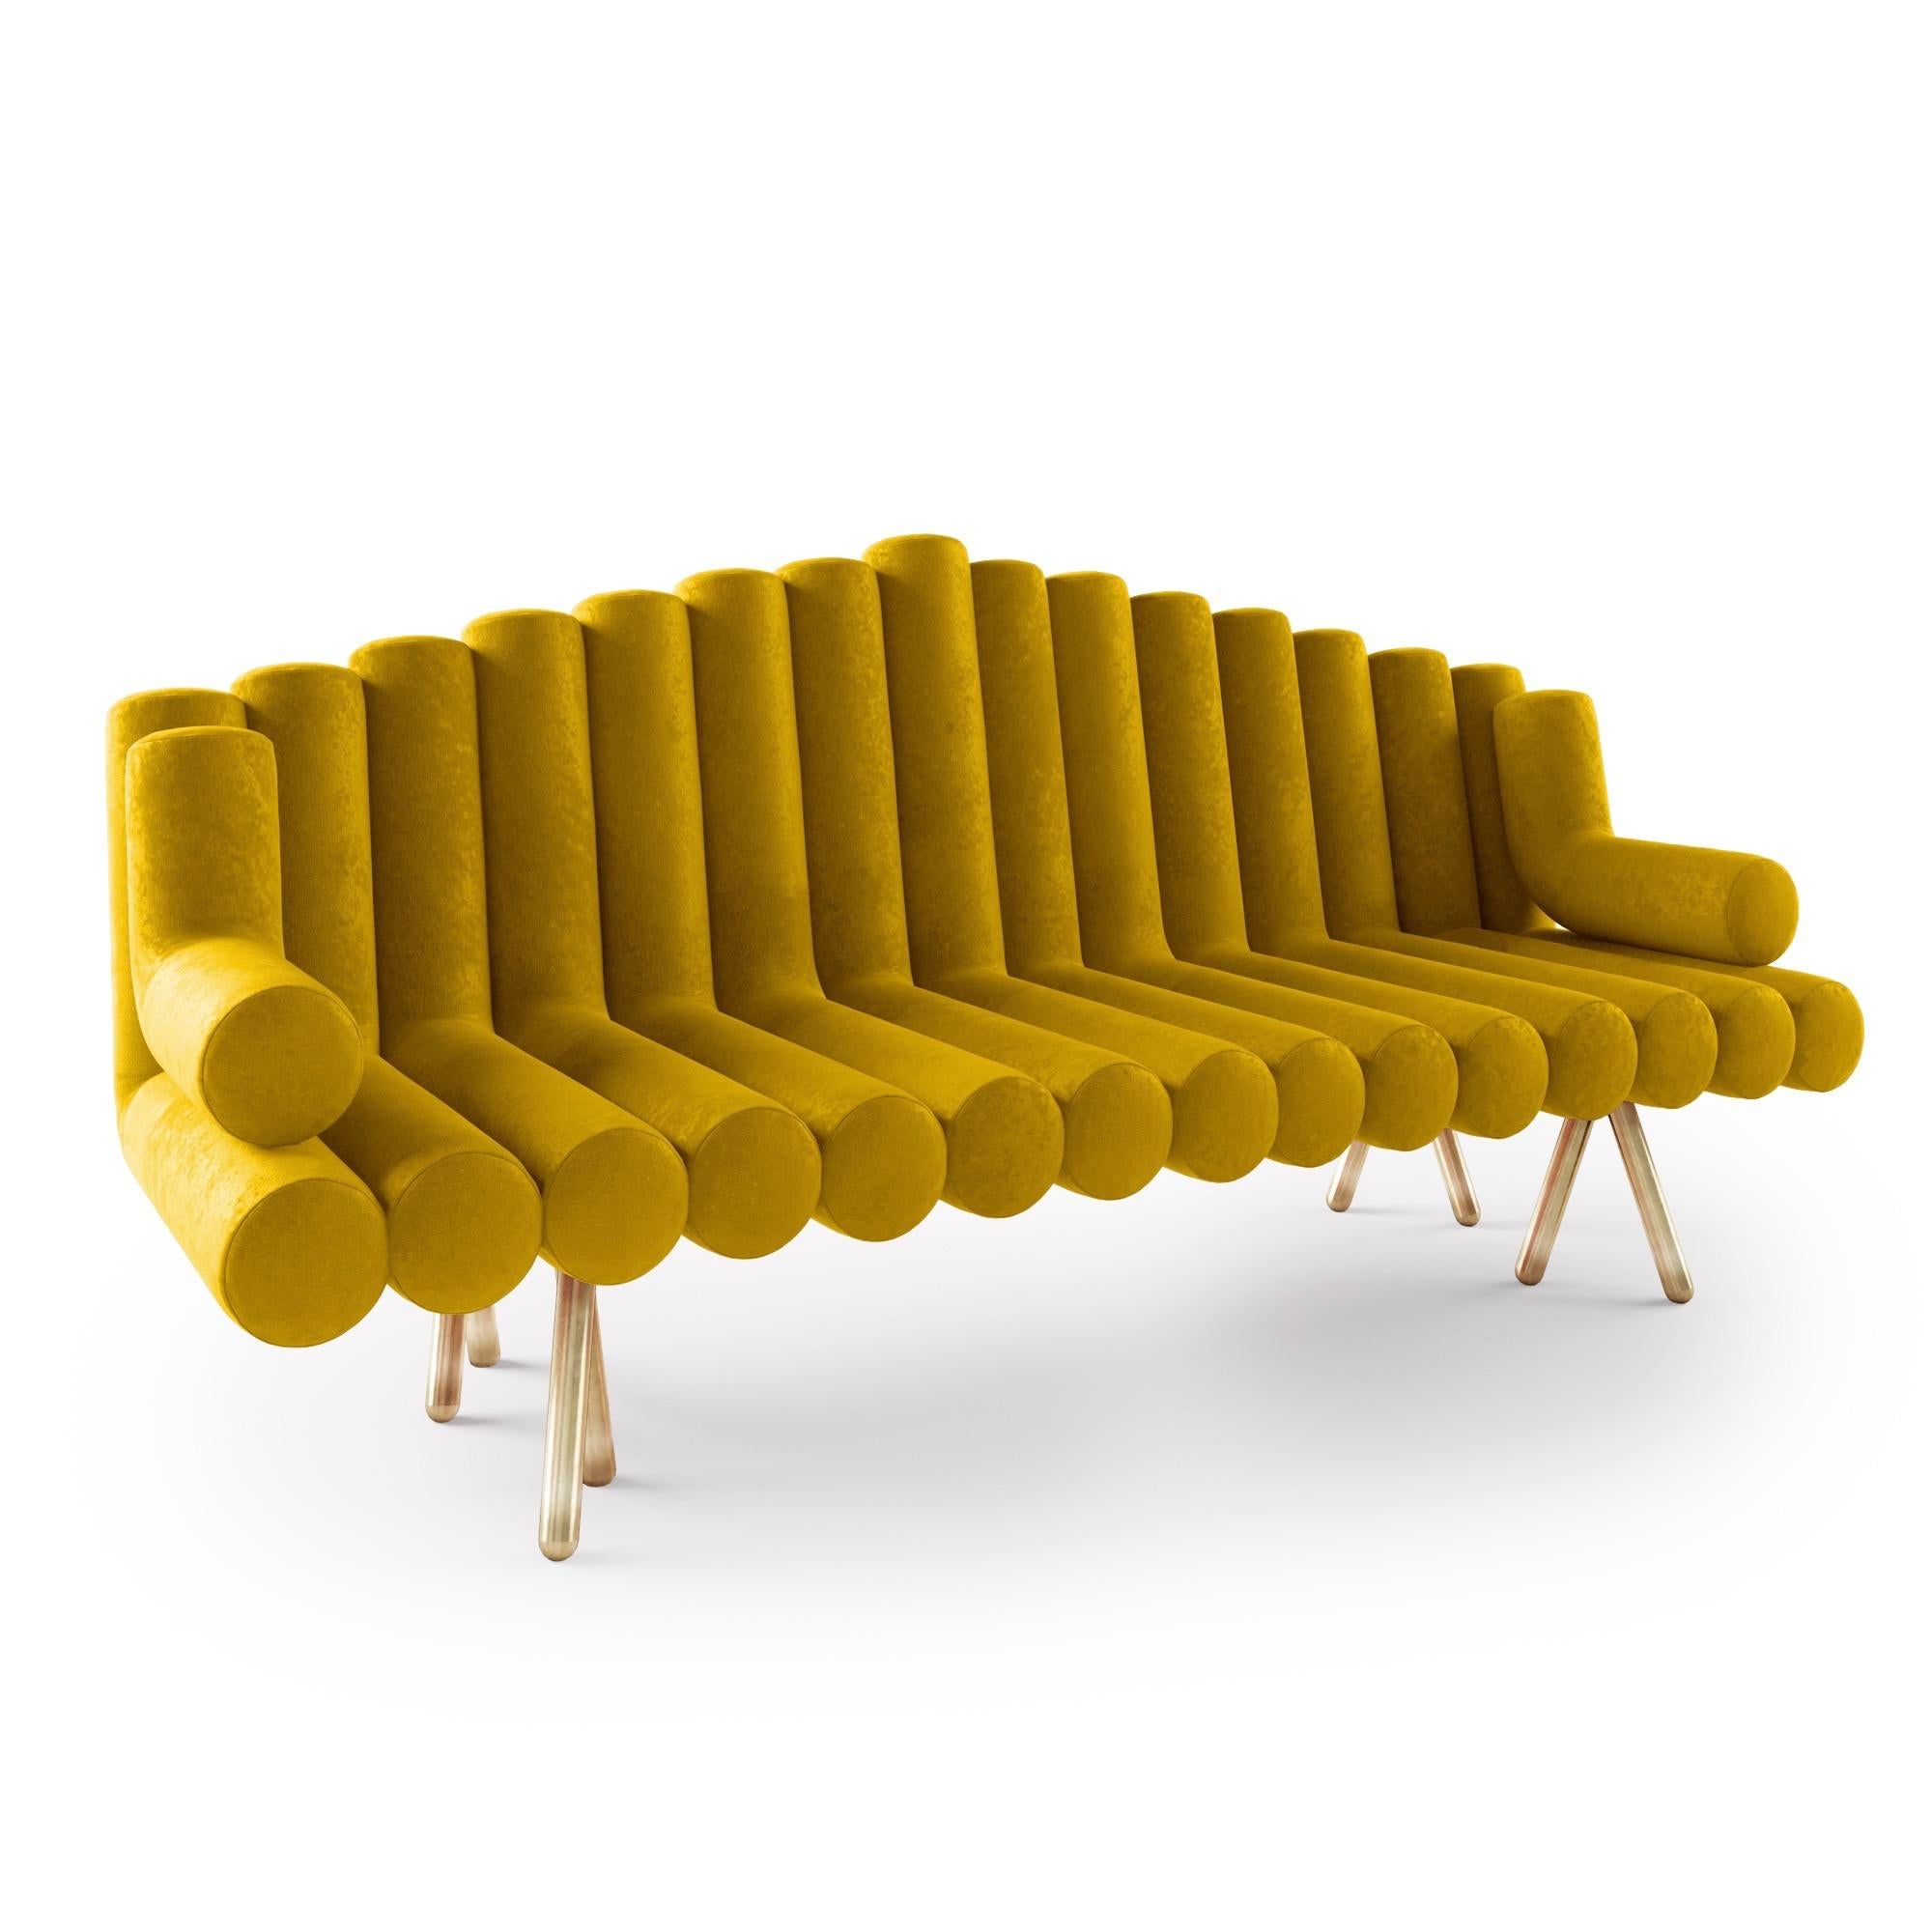 The Flute Sofa takes its inspiration from the pan flute. Unique and beautiful the Flute Sofa is one of Troy Smith's best sellers. Built to exacting standards and quality. The flute sofa is elegantly crafted and built to last. Each tube is